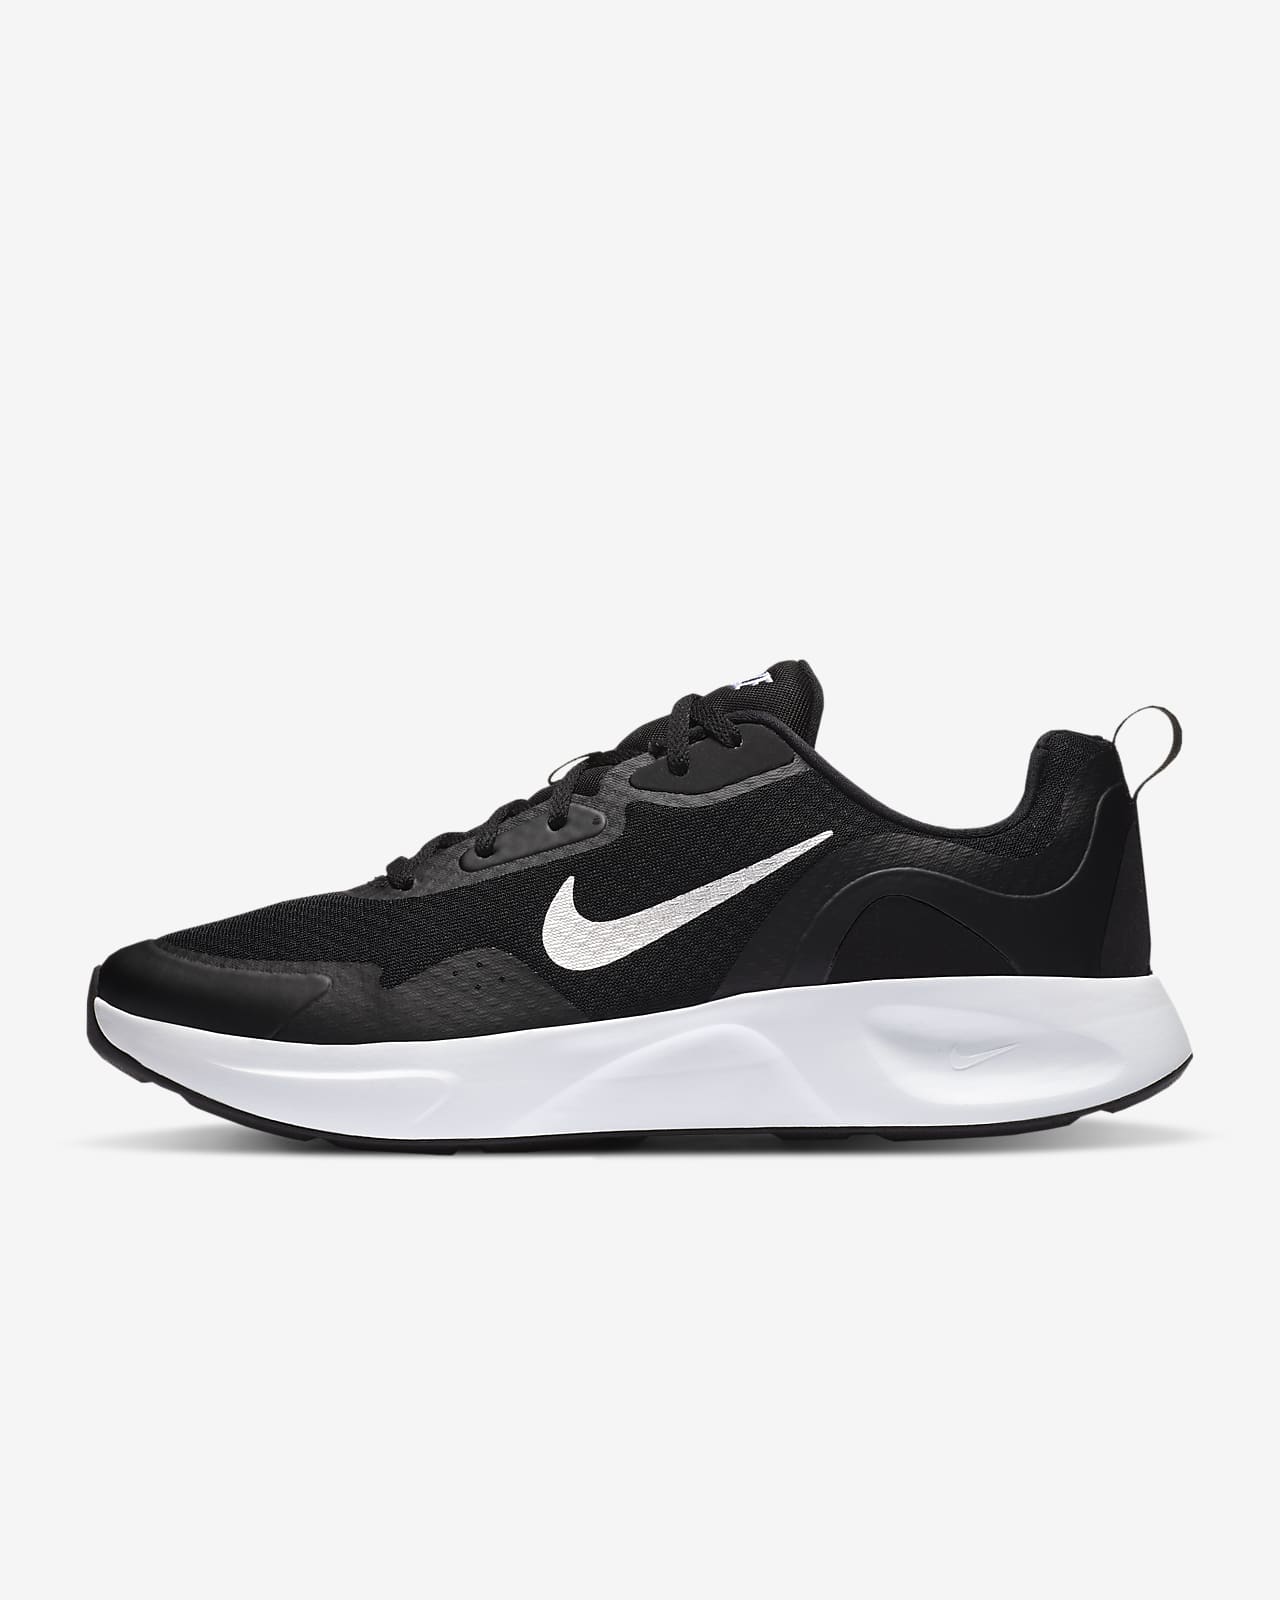 nike shoes for office wear